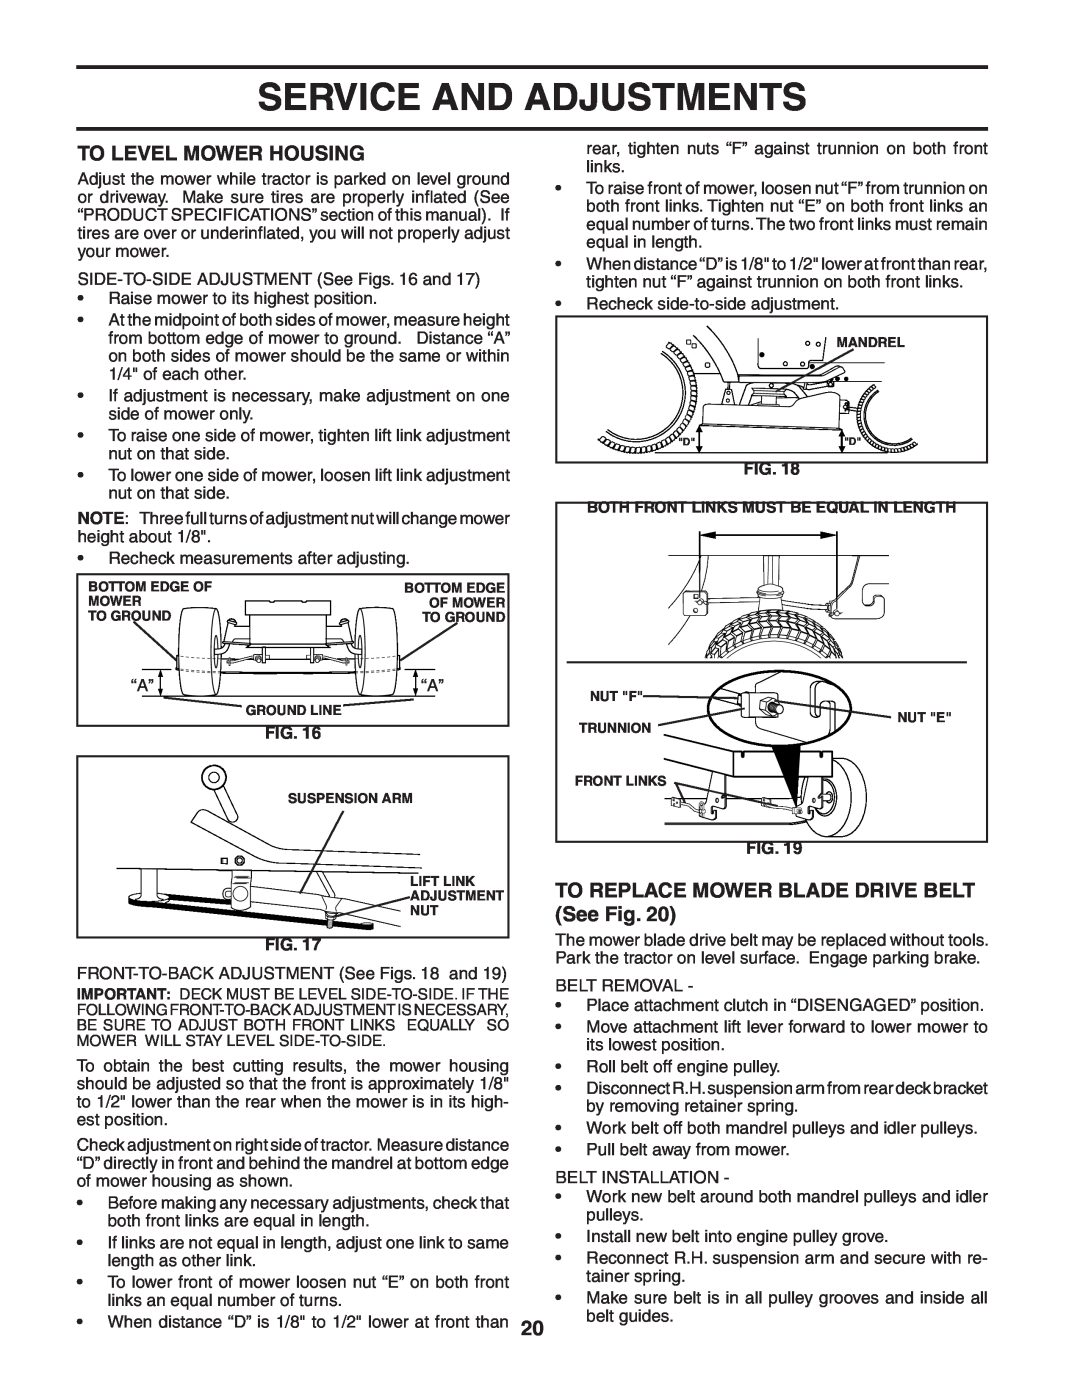 Poulan 183981 manual To Level Mower Housing, TO REPLACE MOWER BLADE DRIVE BELT See Fig, Service And Adjustments 